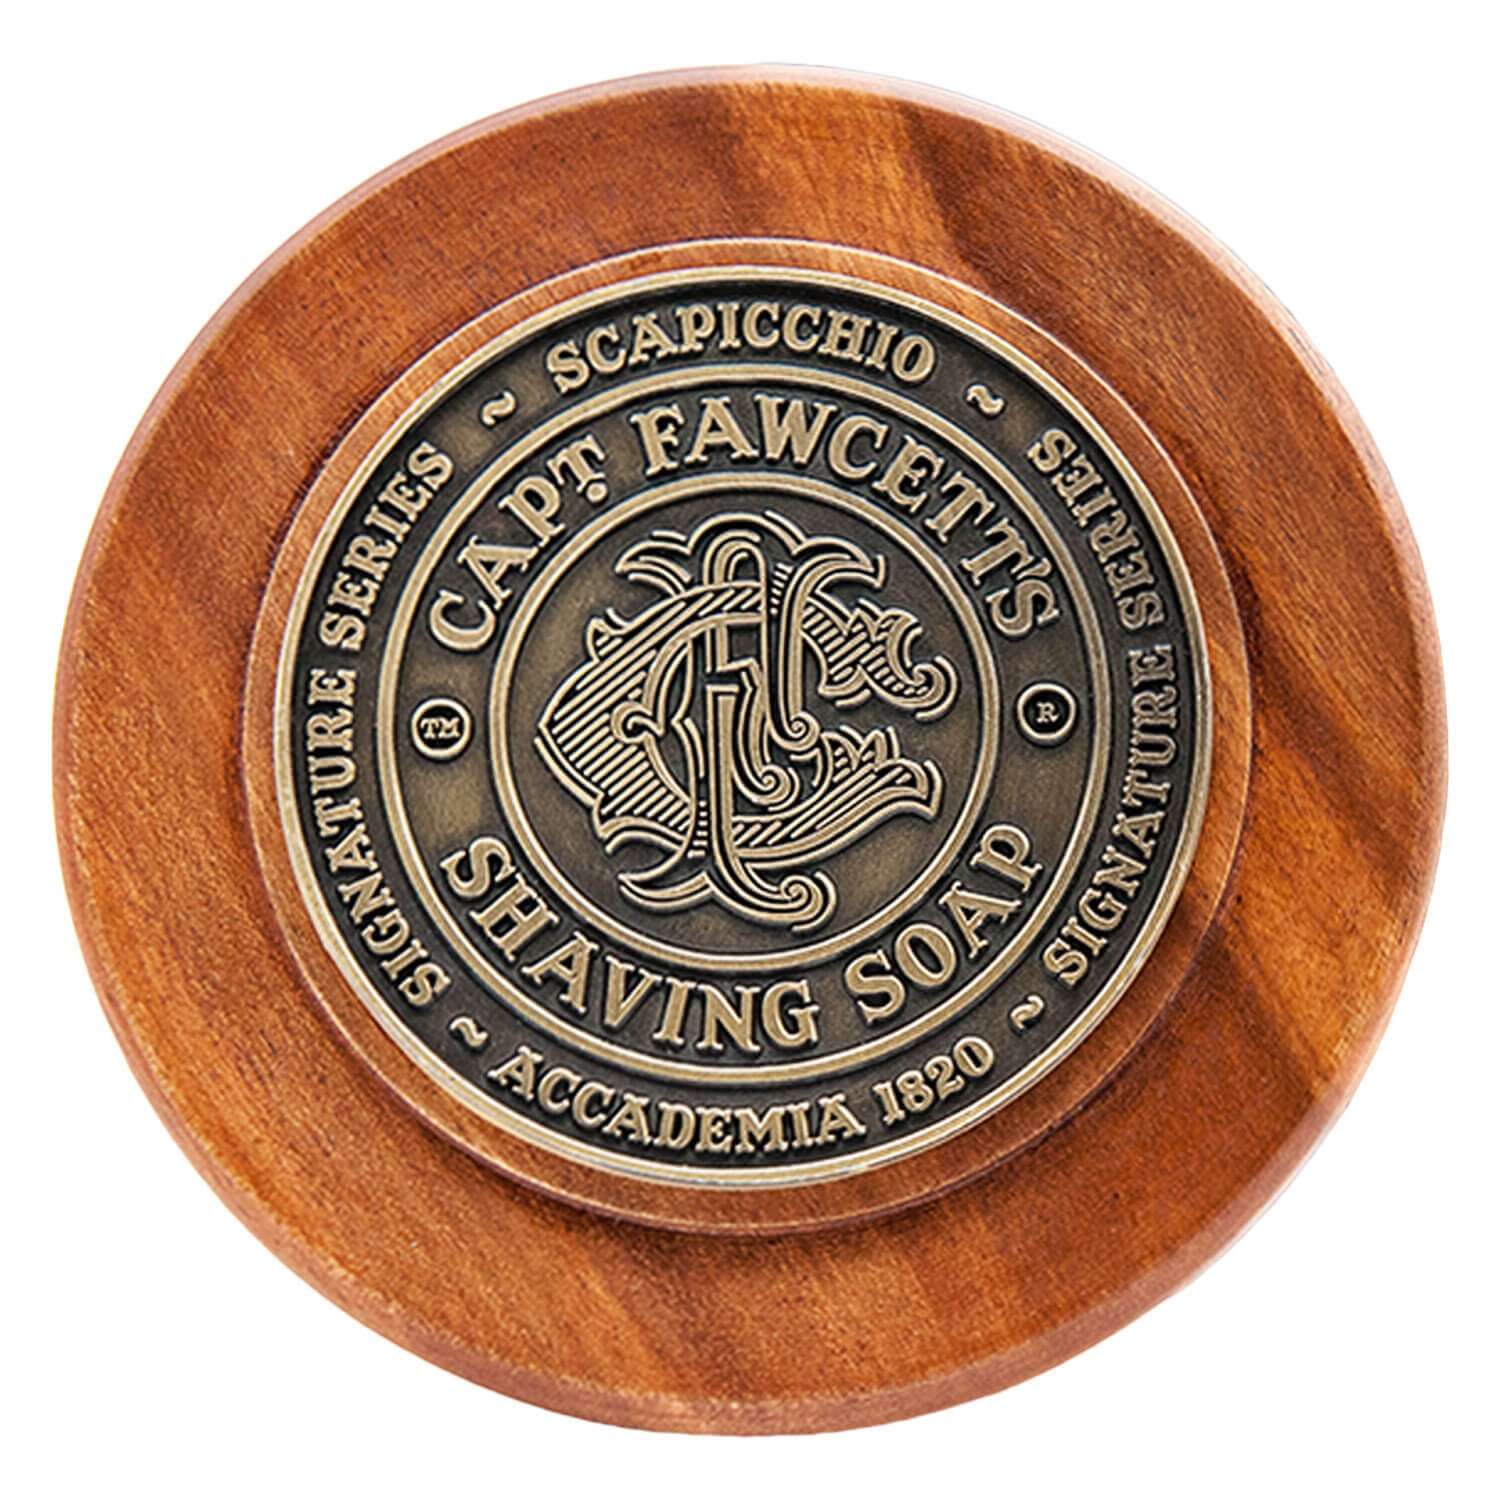 Product image from Capt. Fawcett Care - Scapicchio Shaving Soap